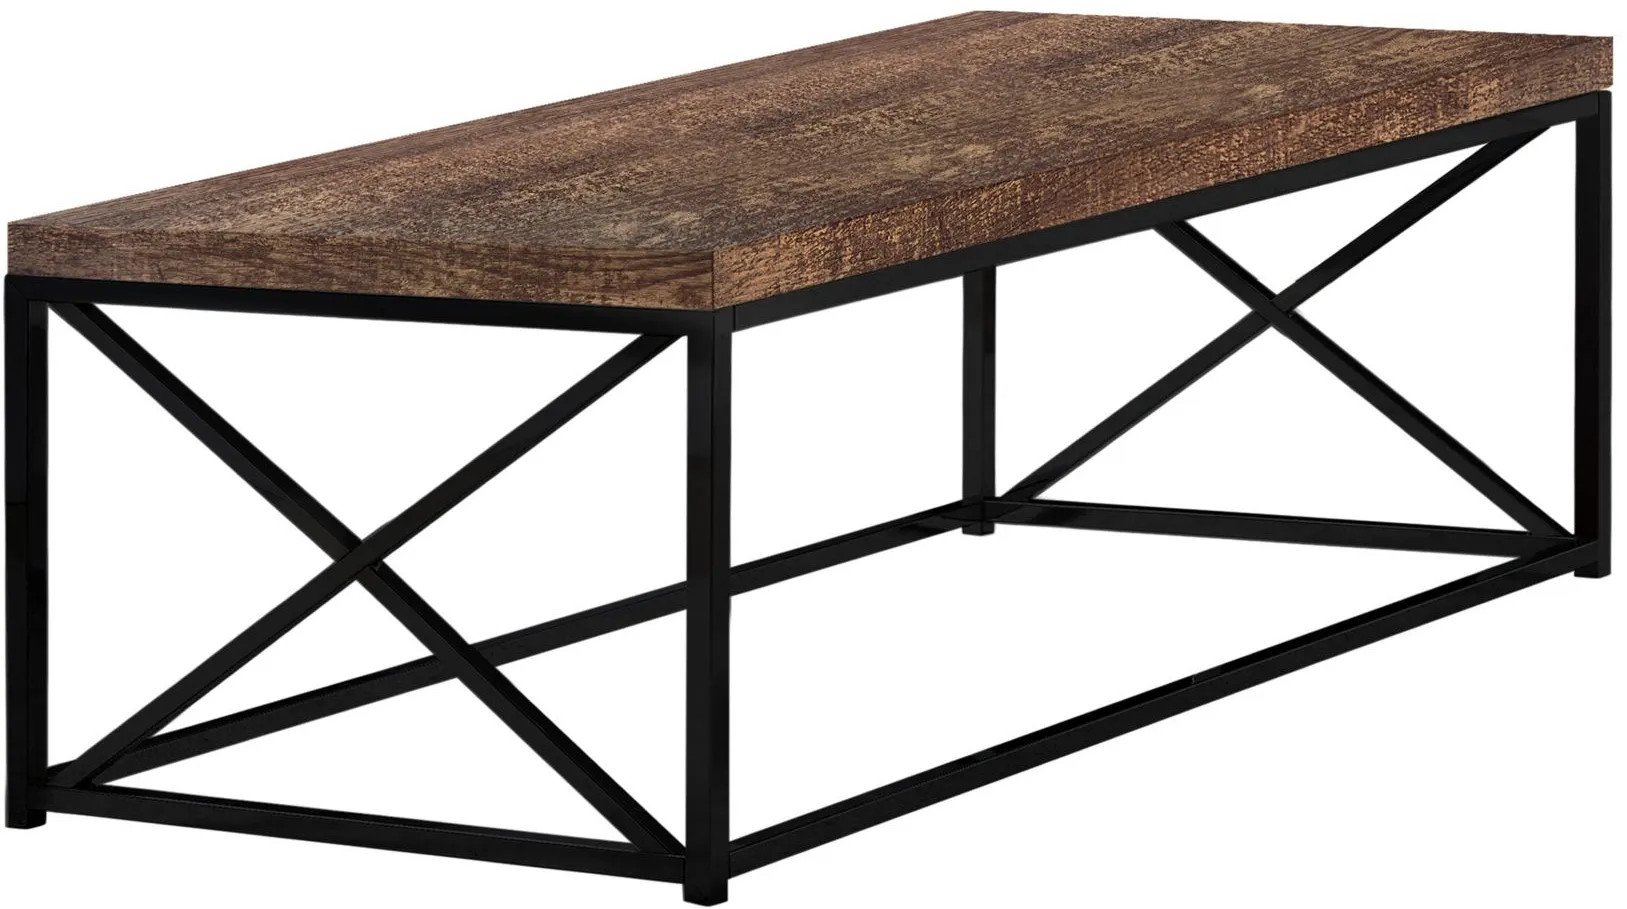 Haan Rectangular Cocktail Table in Brown/Black by Monarch Specialties